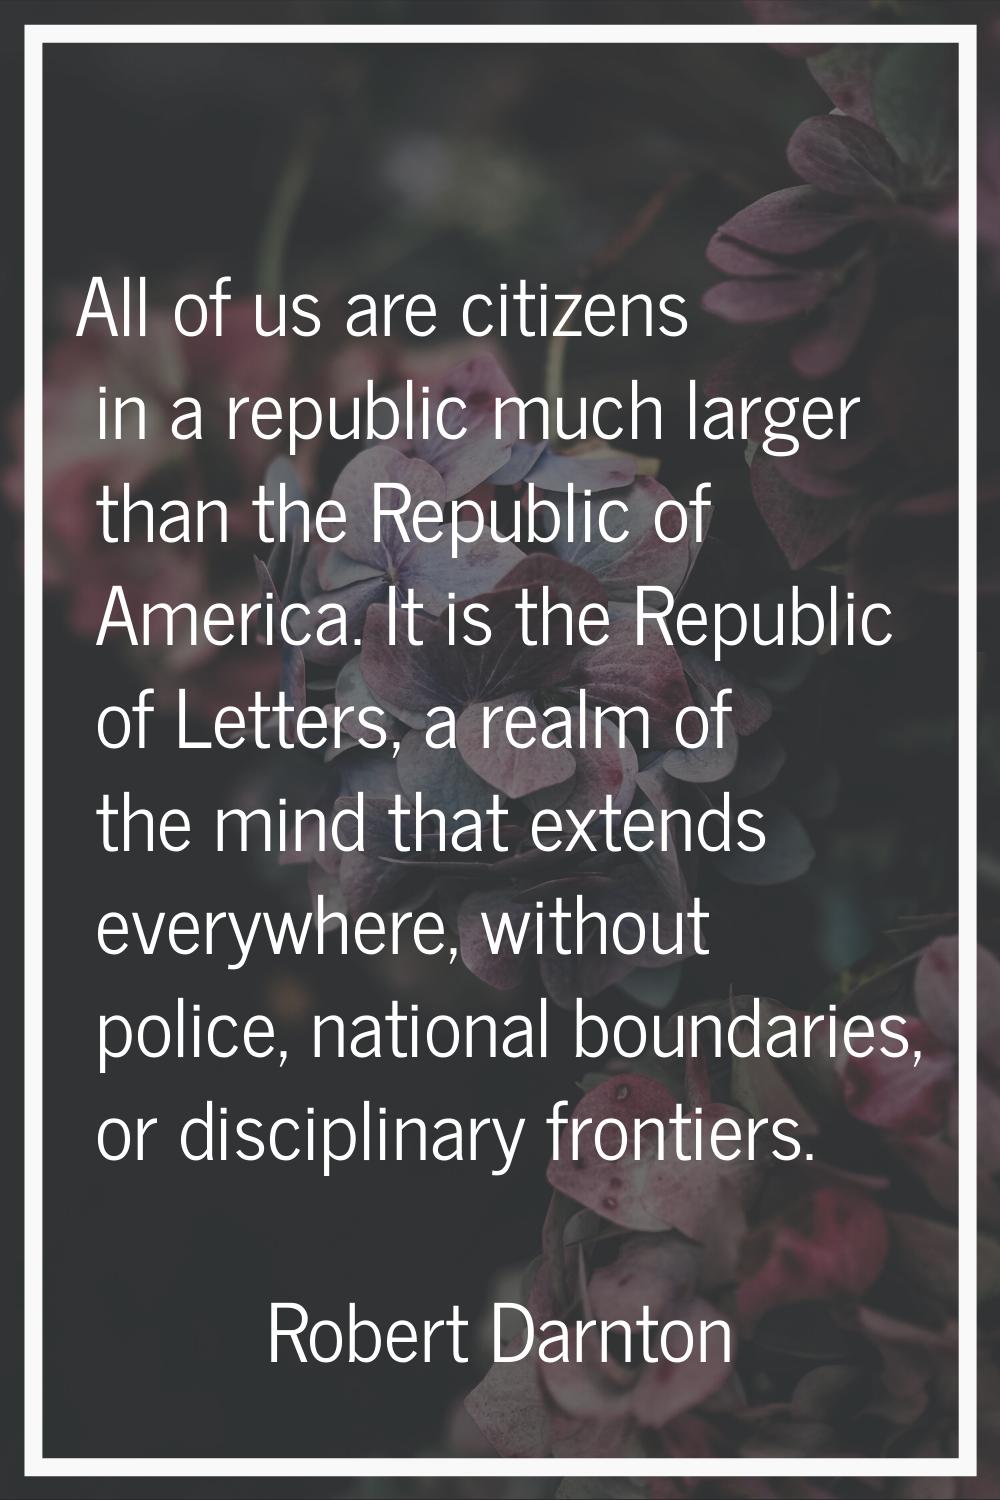 All of us are citizens in a republic much larger than the Republic of America. It is the Republic o